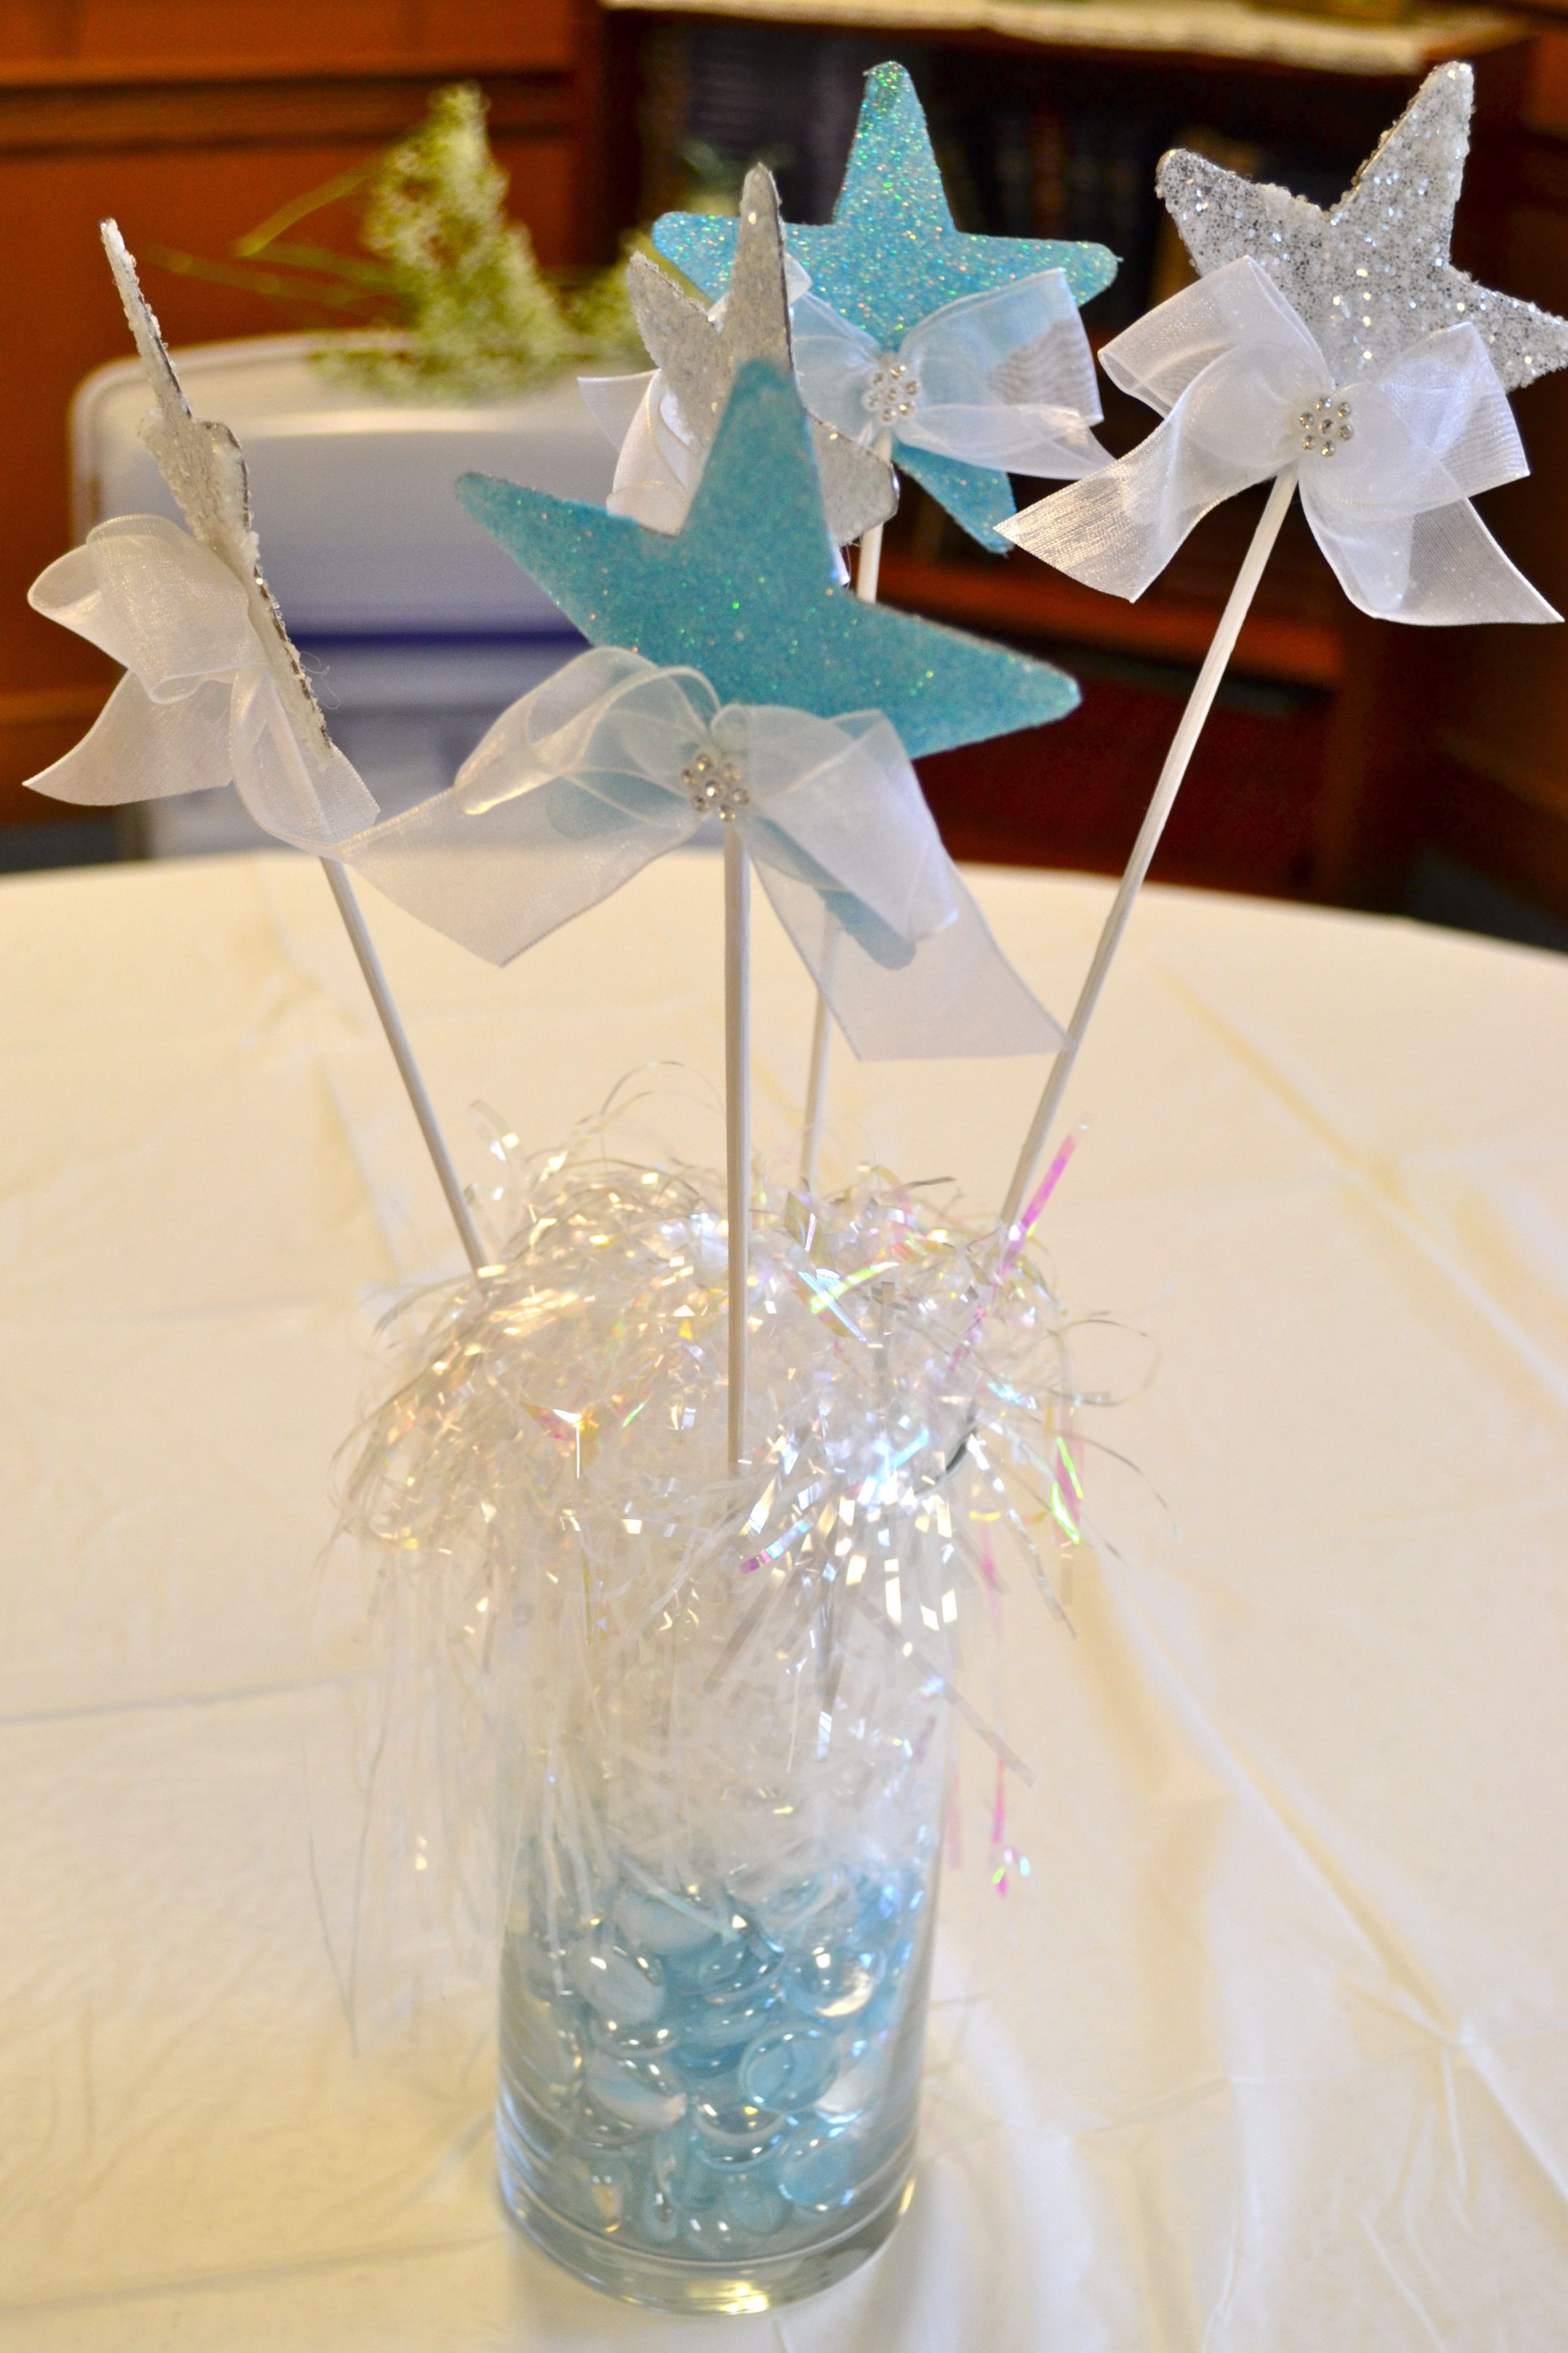 26 Cute Vidrios San Miguel Glass Vase 2024 free download vidrios san miguel glass vase of little star centerpieces empty glass vase filled with silver pertaining to little star centerpieces empty glass vase filled with silver white and blue shiny 